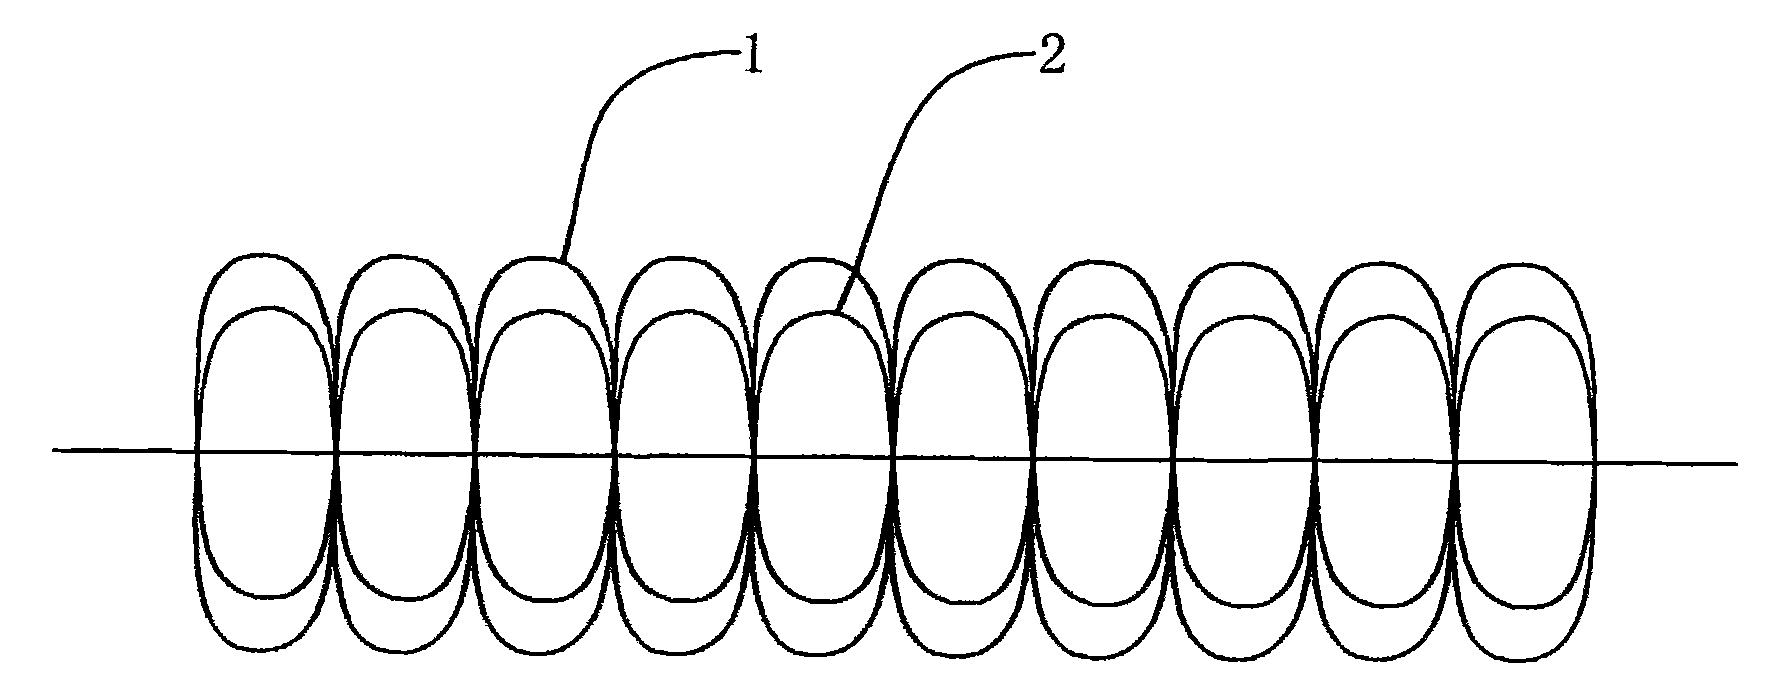 Novel pile loop fabric and method for producing same